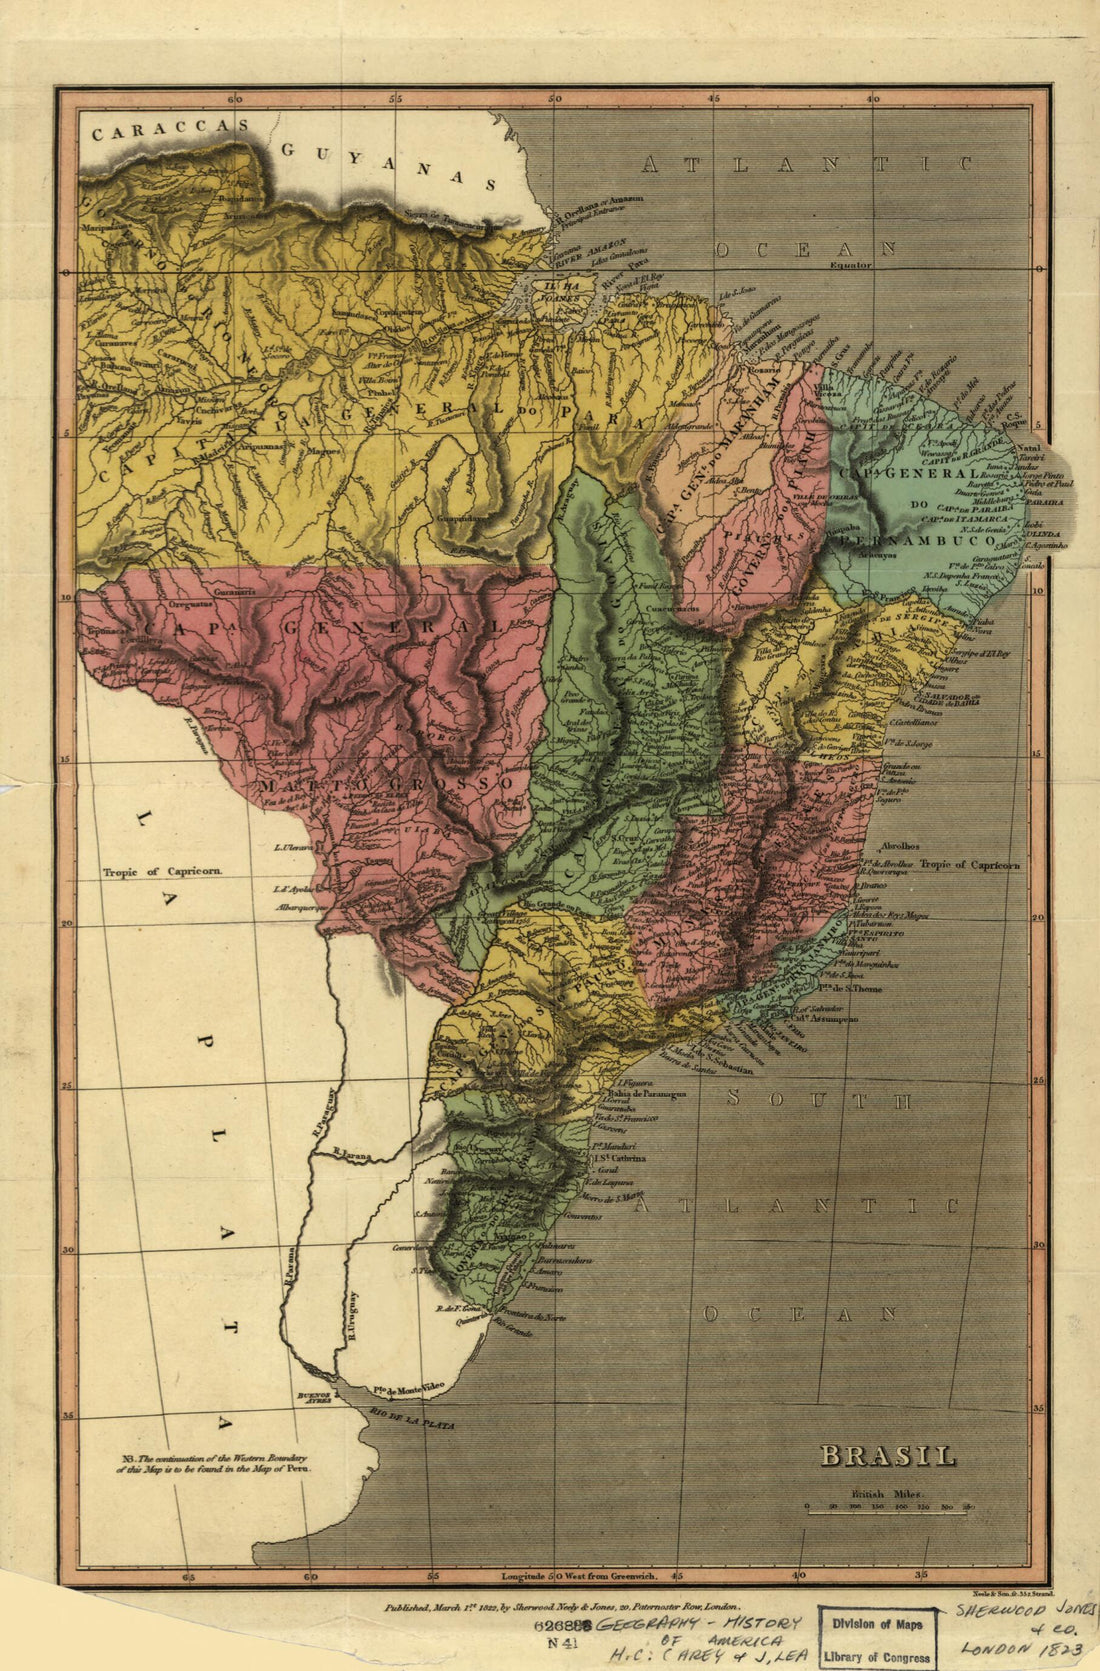 This old map of Brazil from 1822 was created by Henry Charles Carey, Isaac Lea in 1822